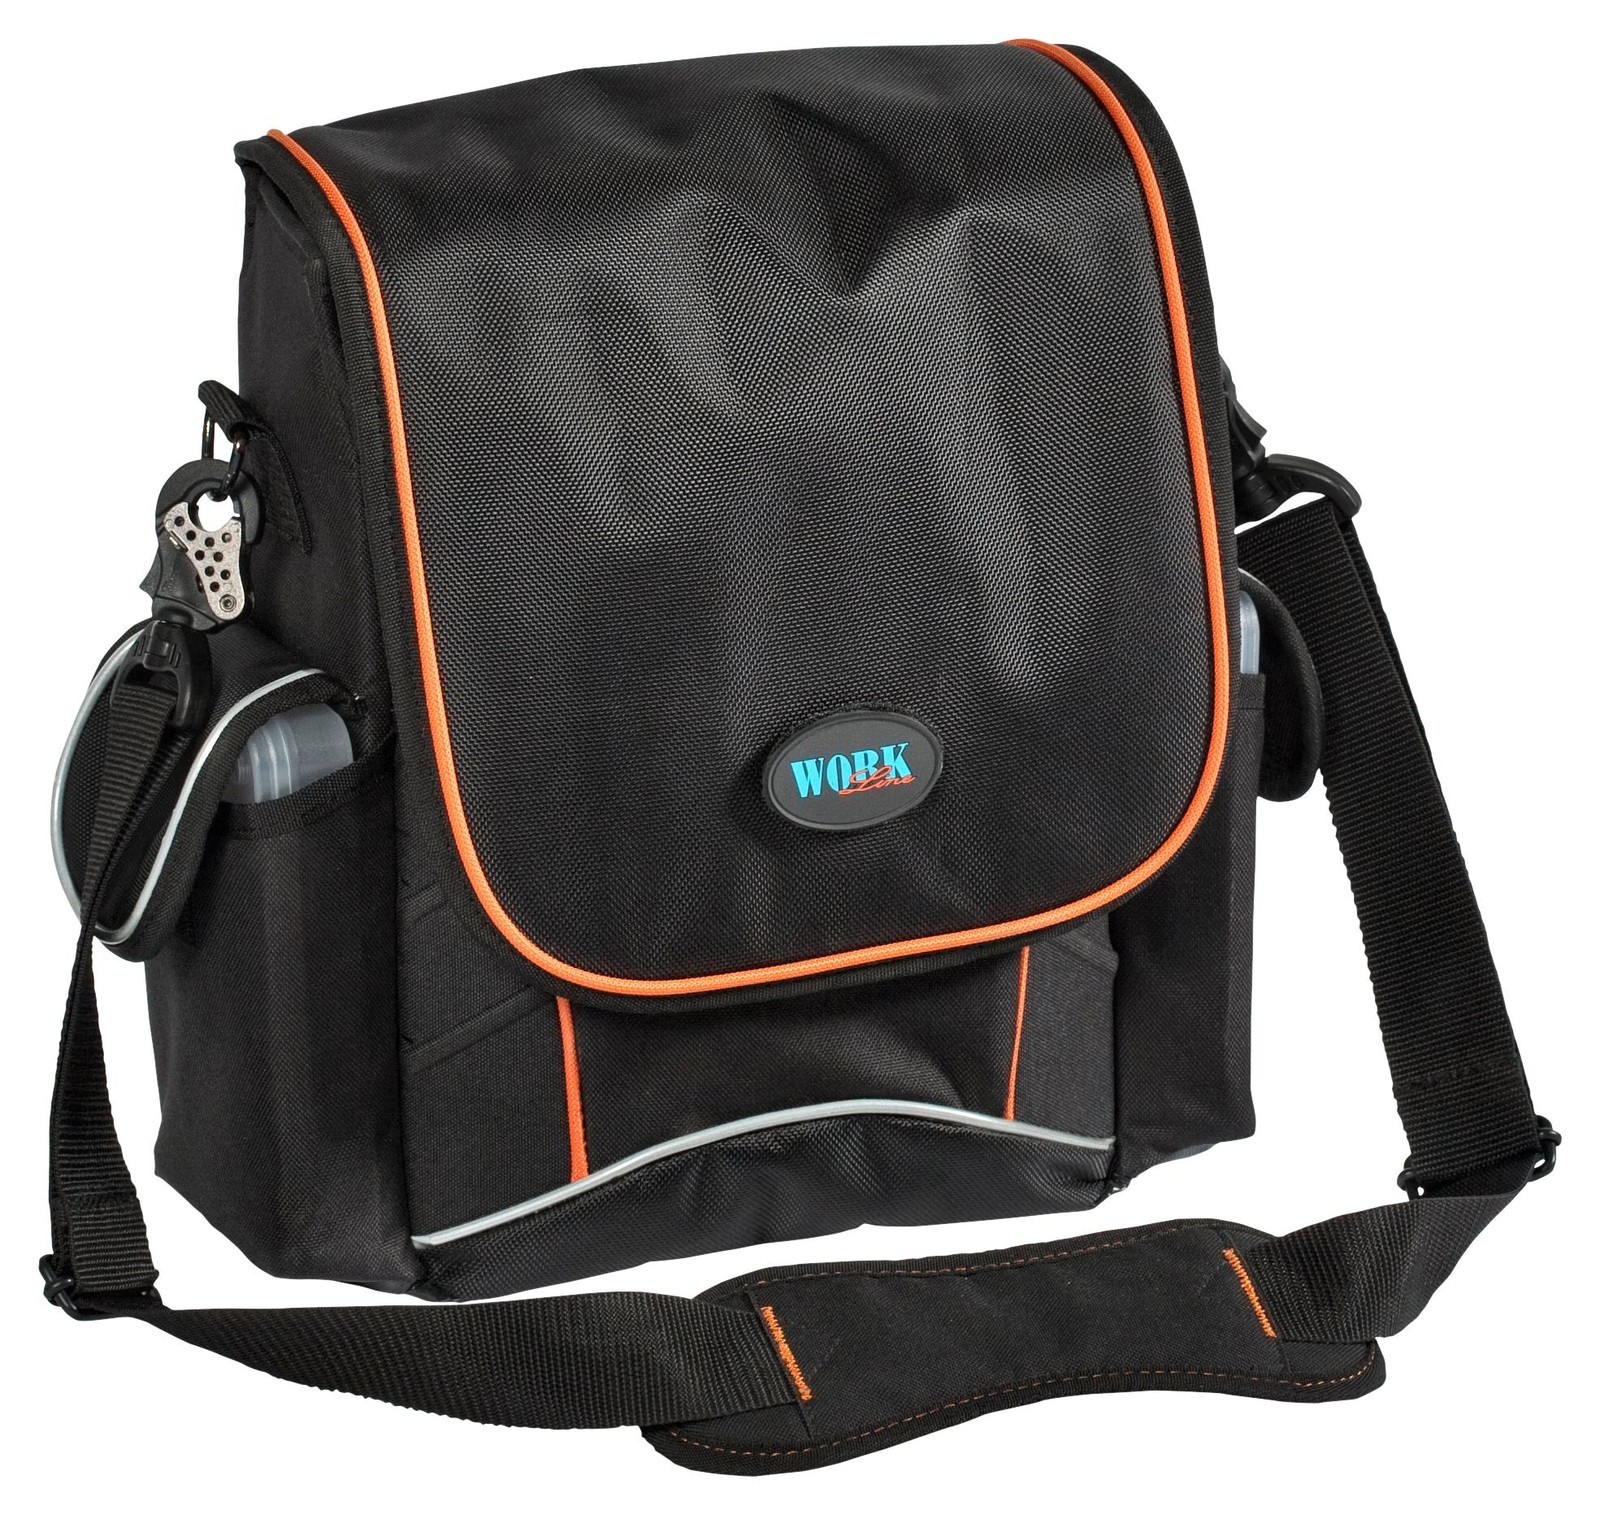 GtGt LinePss Compact Bag Tool Bag, Tear-Proof Fabric